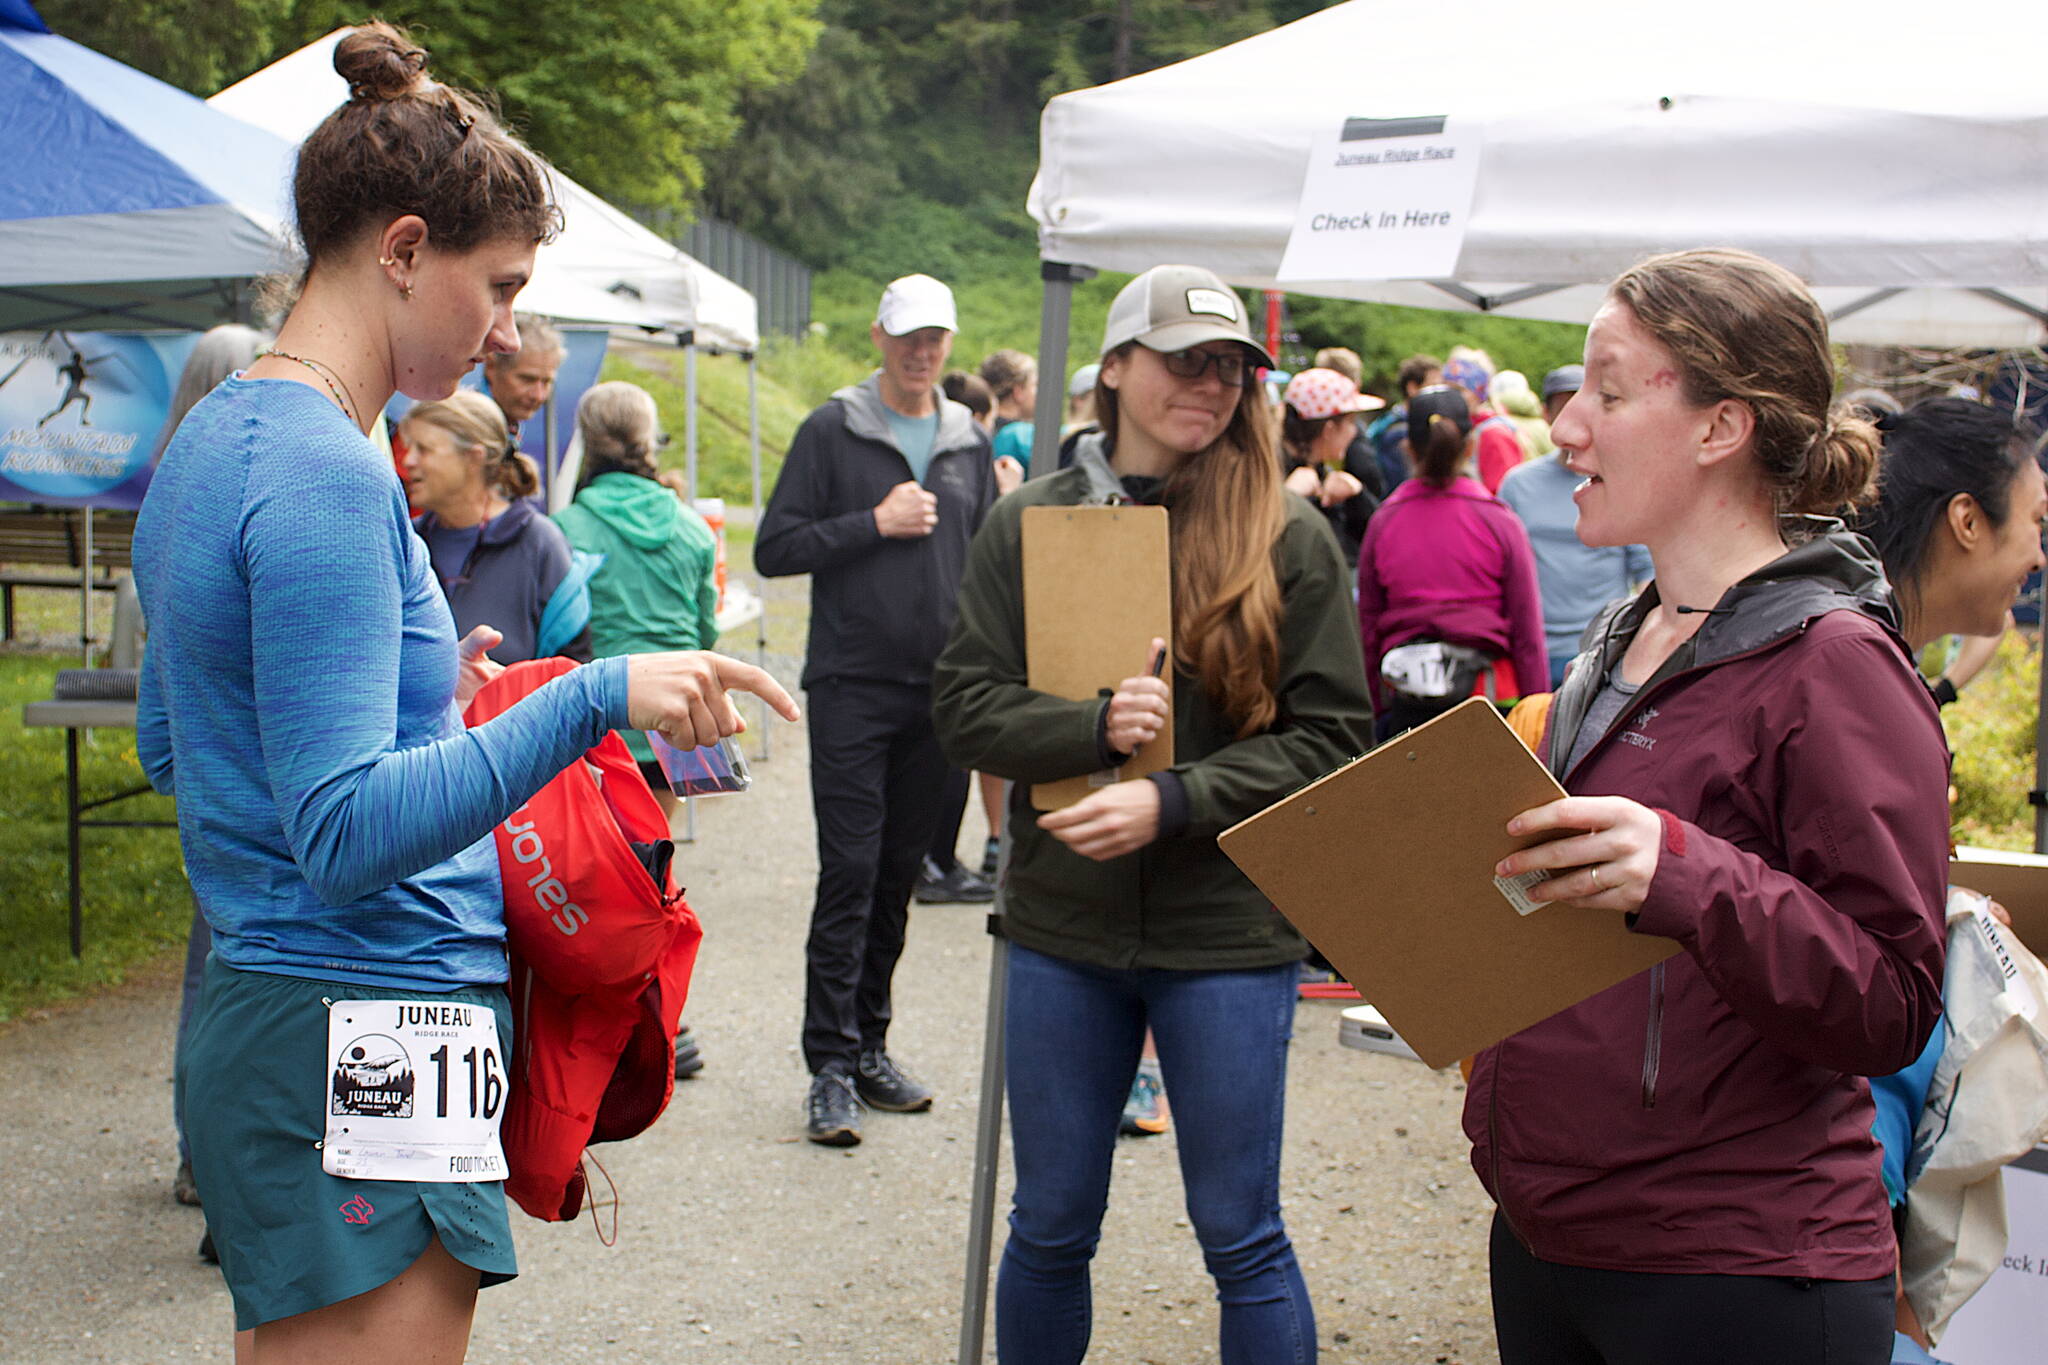 Lauren Tanel, left, shows an emergency space blanket to Sarah Lucas during an equipment check before the Juneau Ridge Race on Sunday at Cope Park. Participants in the race were also required to carry a jacket, long-sleeve shirt, hat, gloves, water and food. (Mark Sabbatini / Juneau Empire)